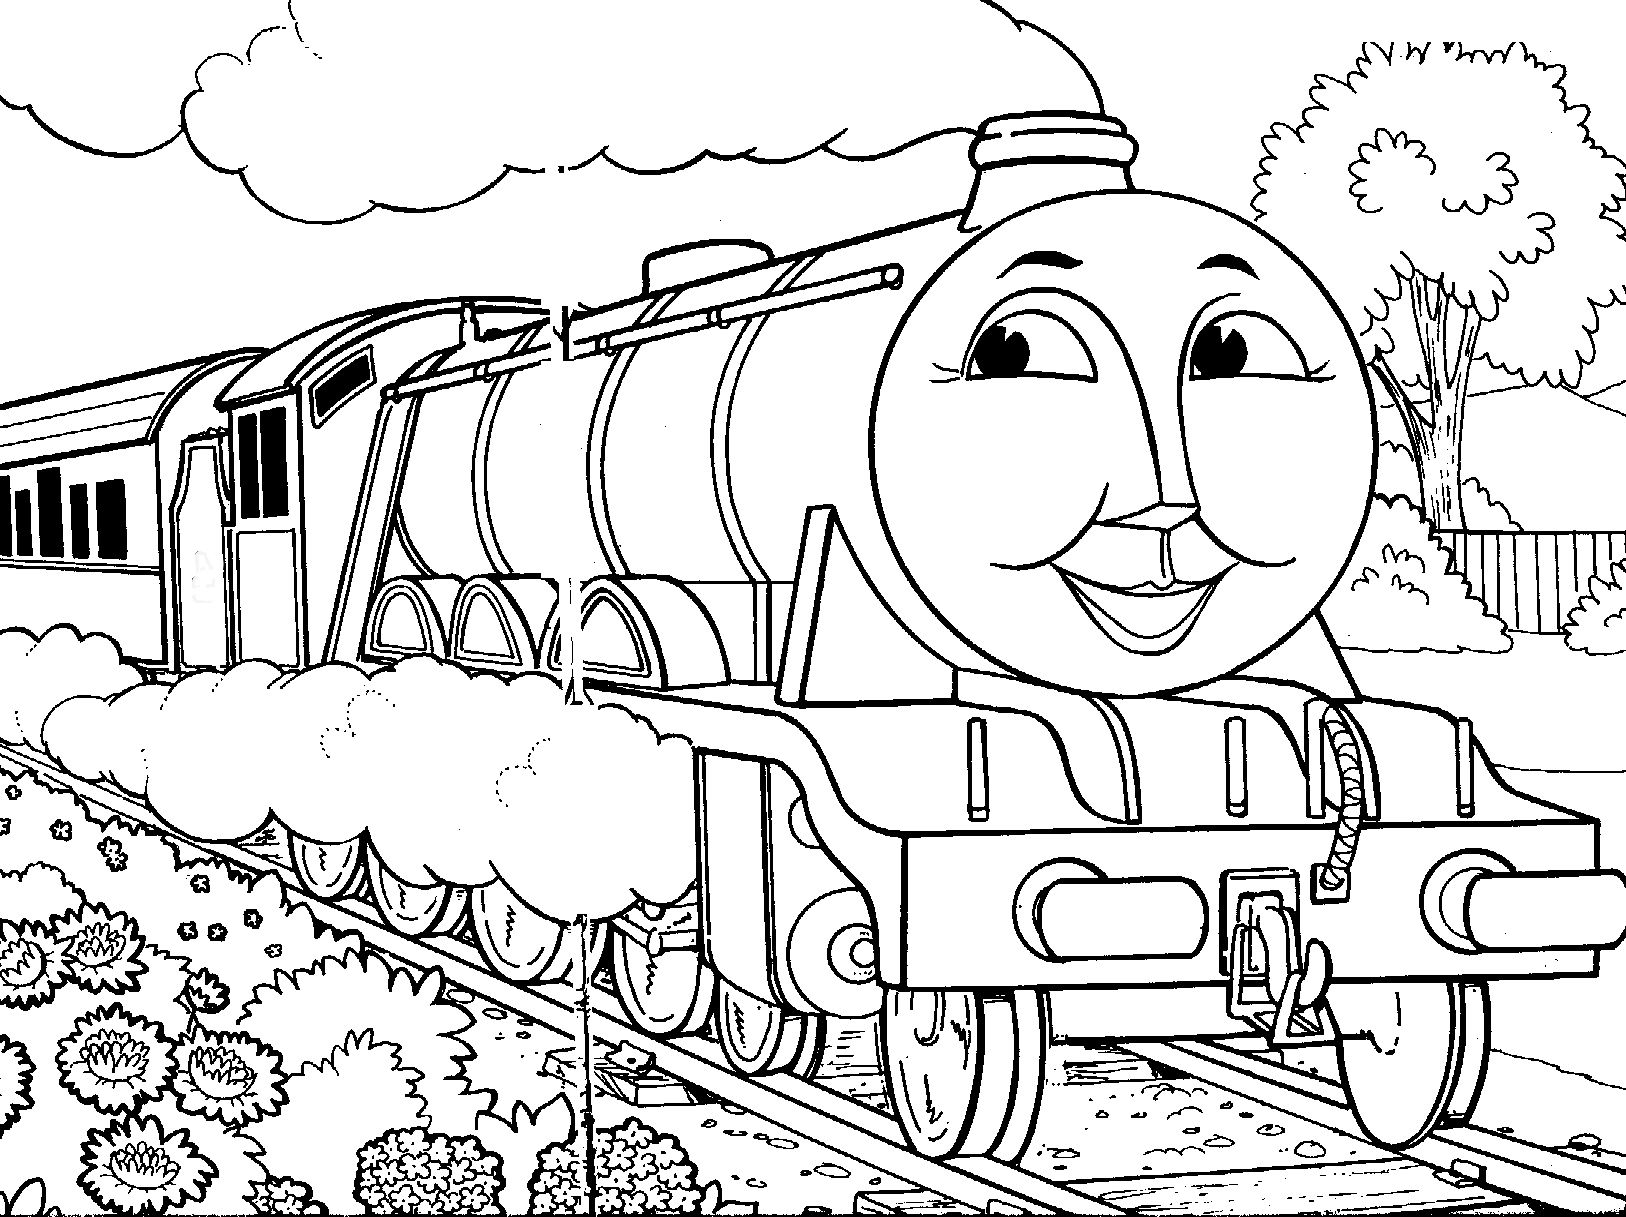 Csx Train Coloring Pages at GetColorings.com | Free ...